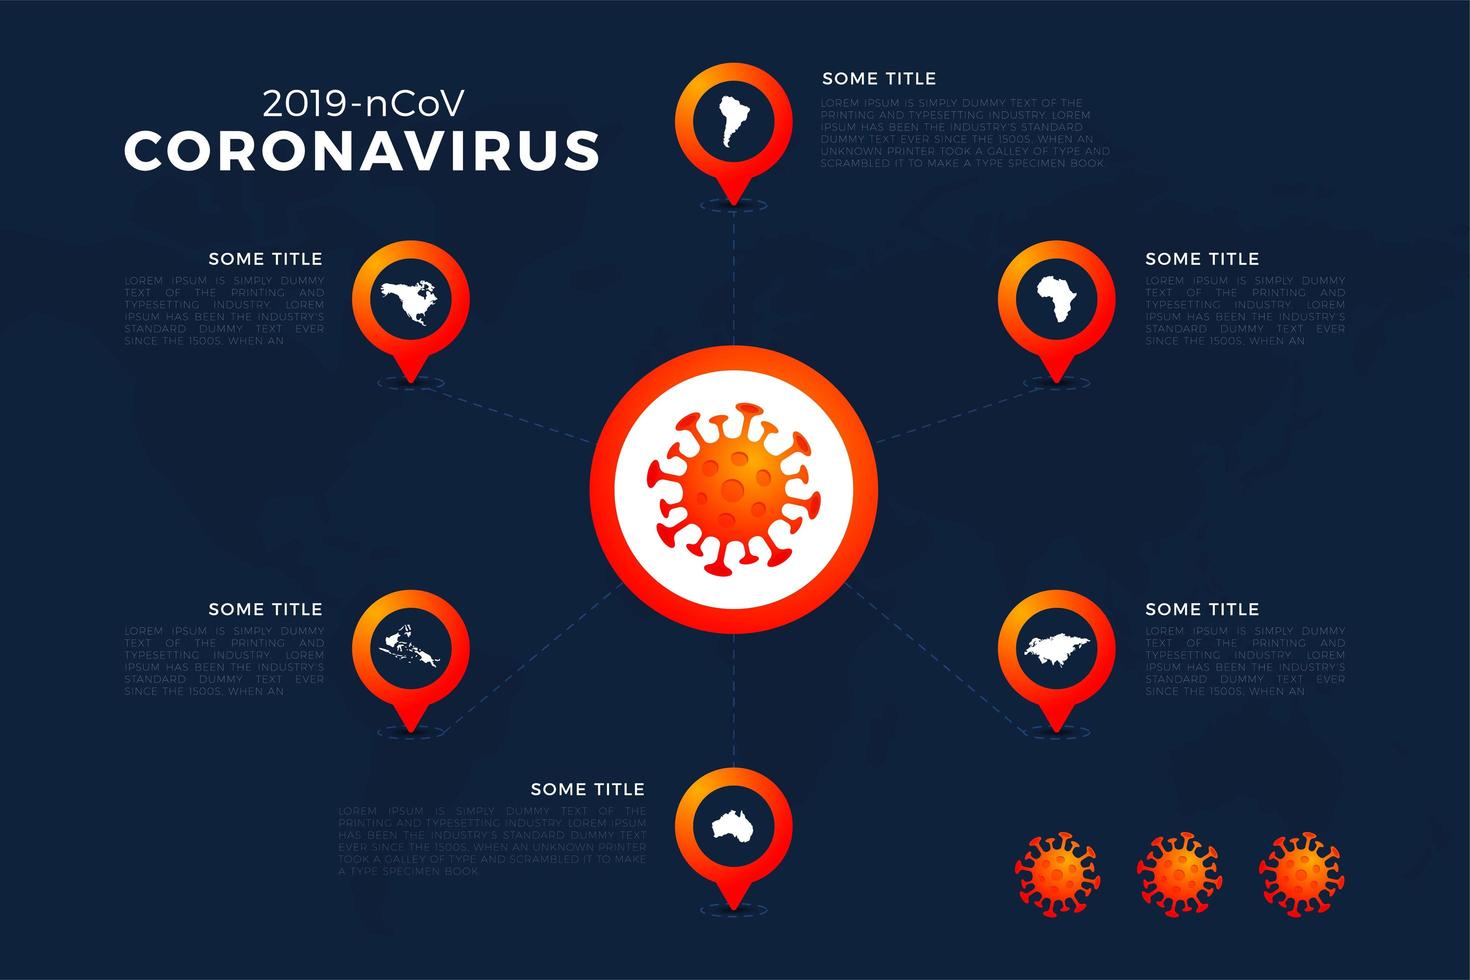 Covid-19, Covid 19 Map With Infographic Report Worldwide Globally. Coronavirus Disease 2019 Situation Update Worldwide. Maps Infographic Area Show Situation in the World vector